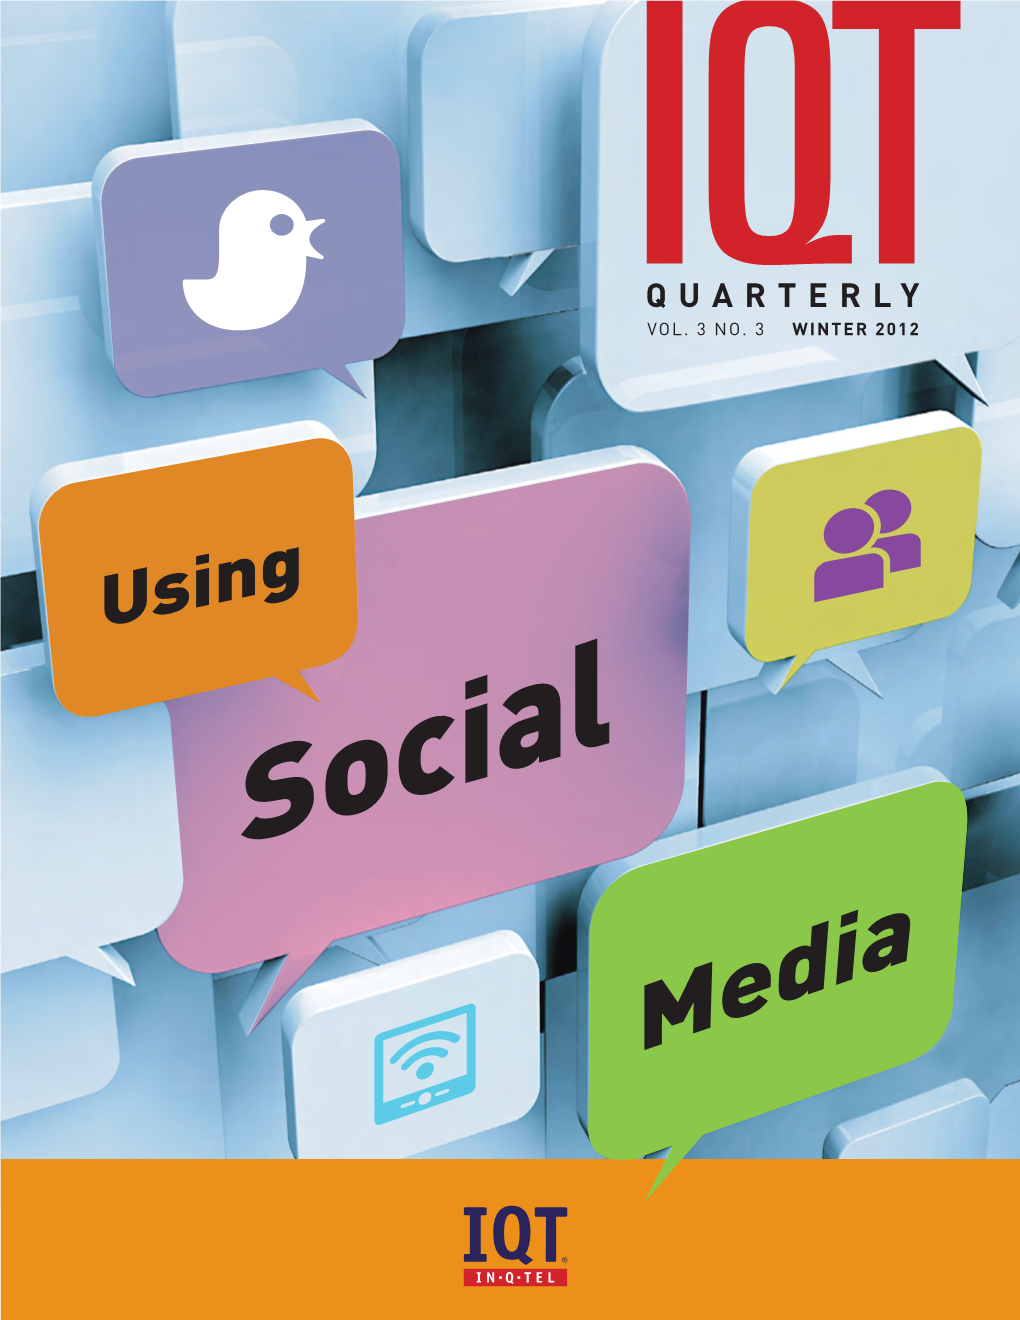 IQT Quarterly Is a Publication of In-Q-Tel, Inc., the Strategic Investment Firm That Serves As a Bridge Between the U.S